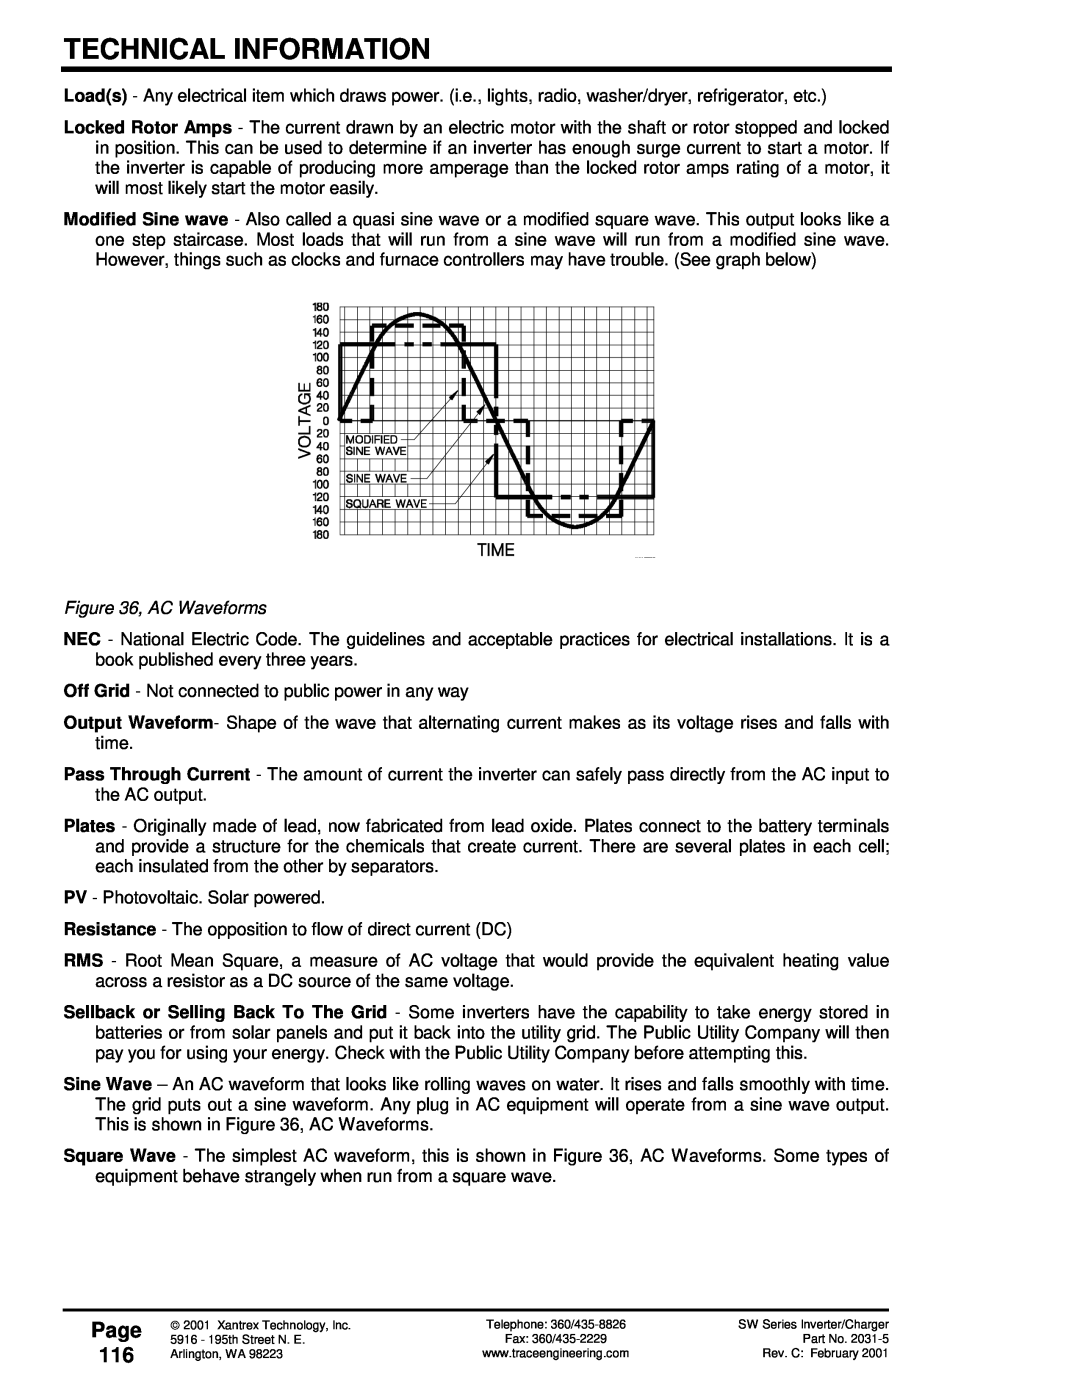 Xantrex Technology SW Series owner manual Page 116, Technical Information 